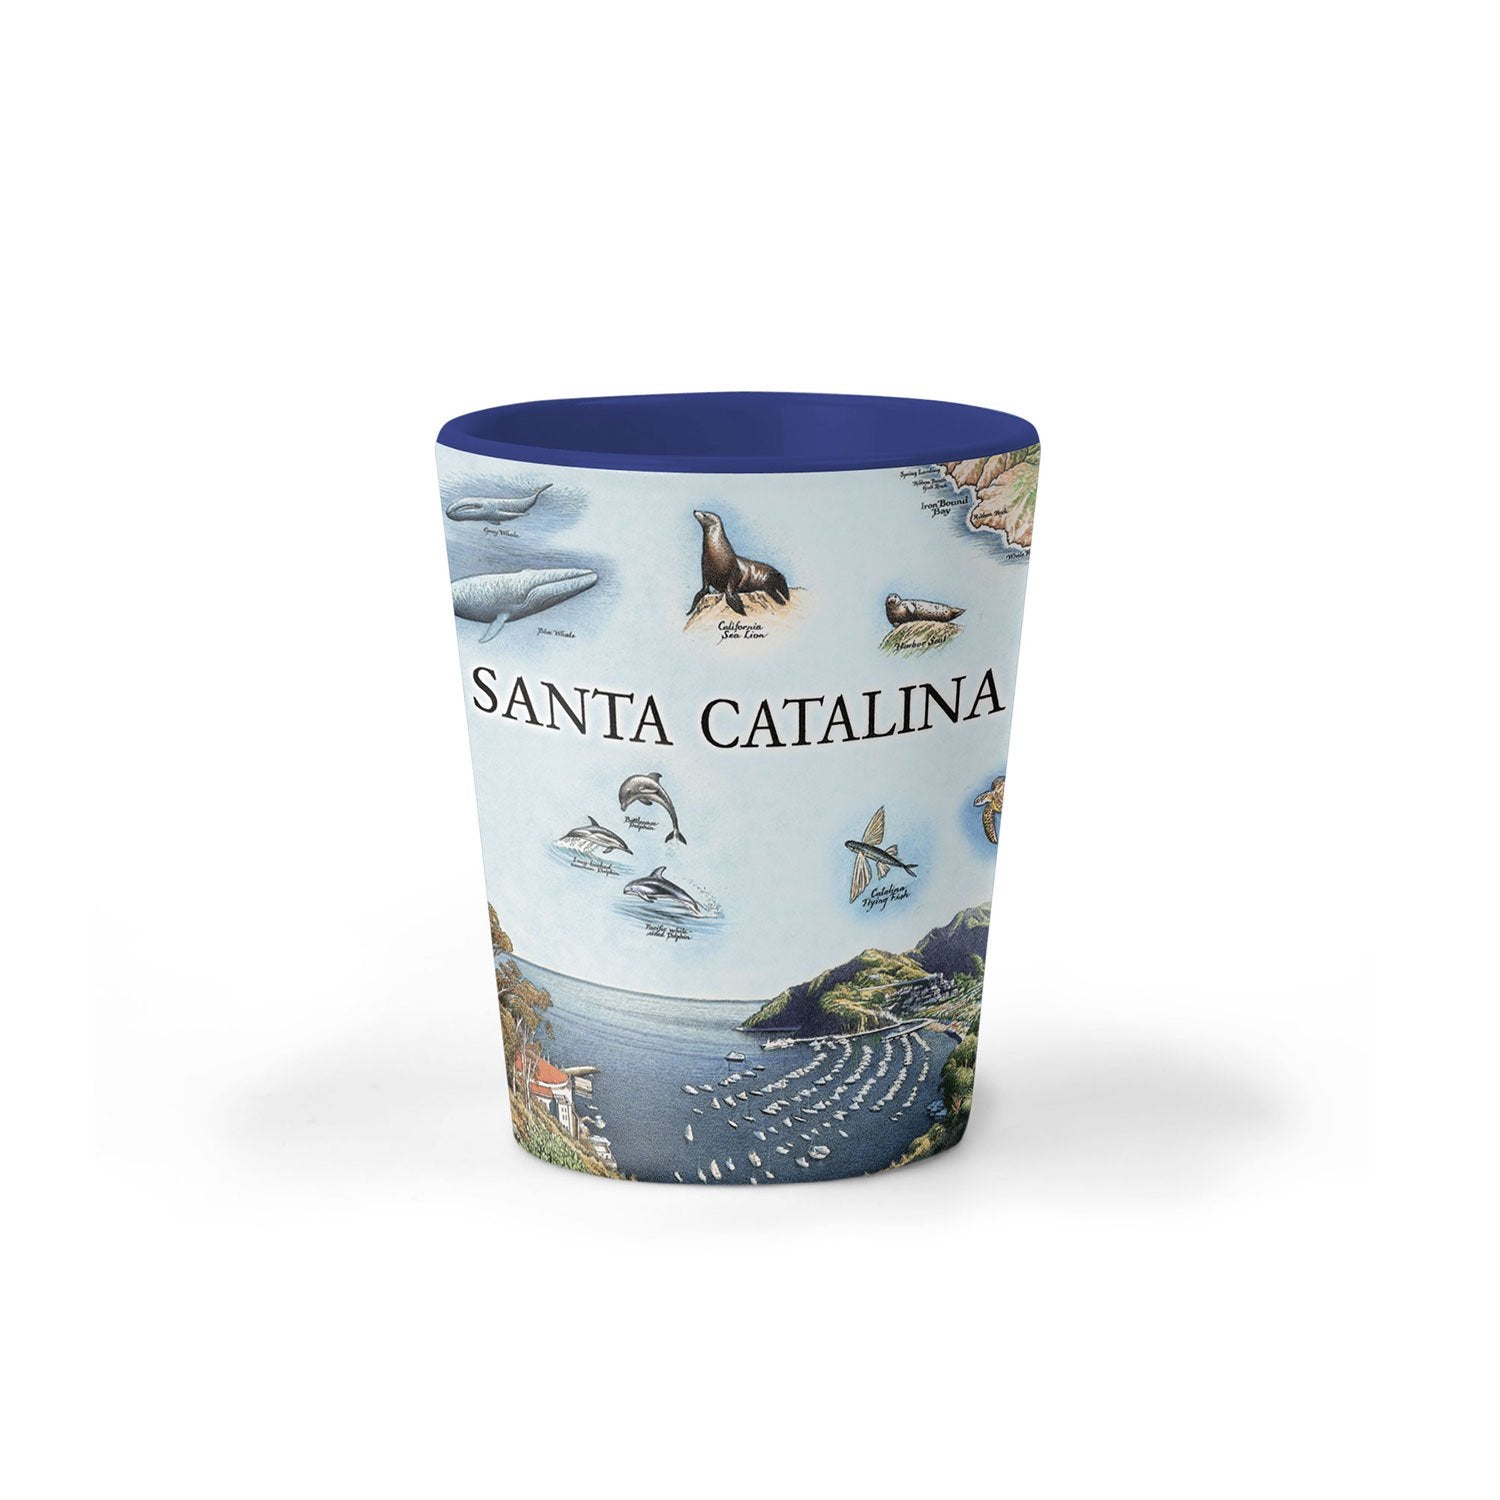 California's Santa Catalina Island Map Ceramic shot glass by Xplorer Maps. The map features illustrations of places such as Wrigley Memorial, El Rancho Escondido, and Avalon Bay. Flora and fauna include Bison, Catalina Island Fox, Catalina Orange Lip butterfly, Channel Islands tree poppy, and Island oak. 